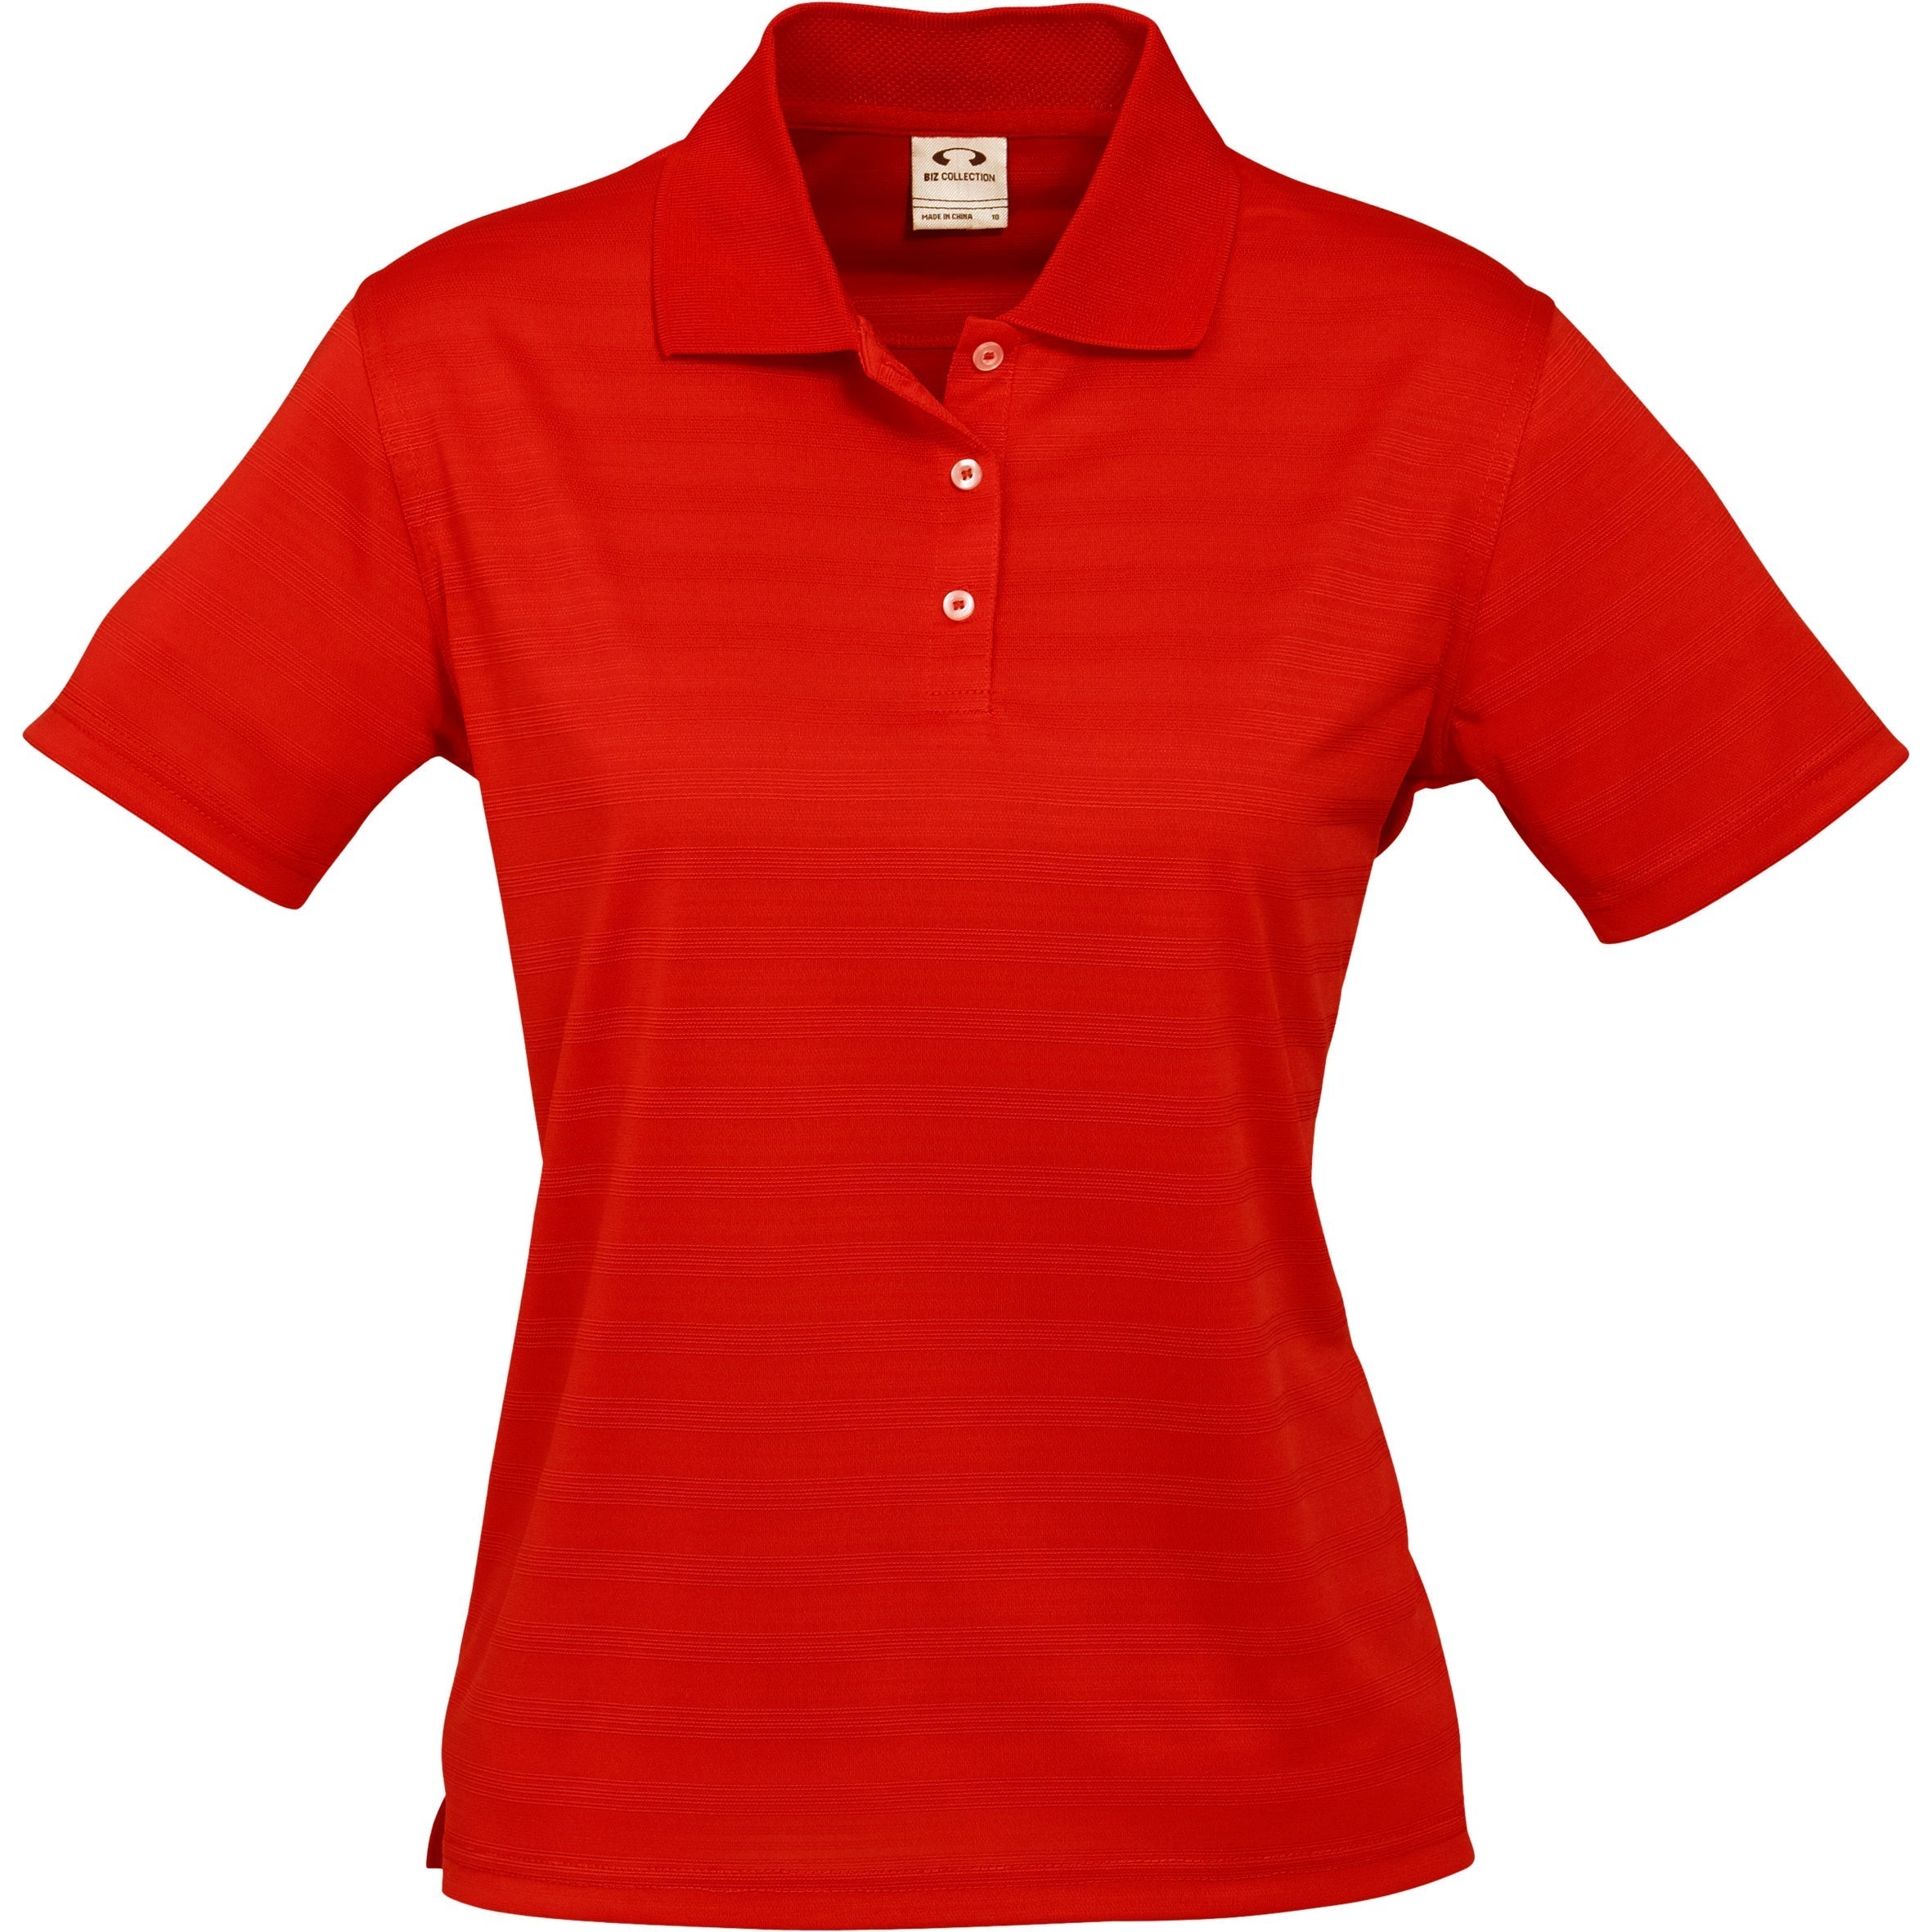 Ladies Icon Golf Shirt - Lime Only-L-Red-R